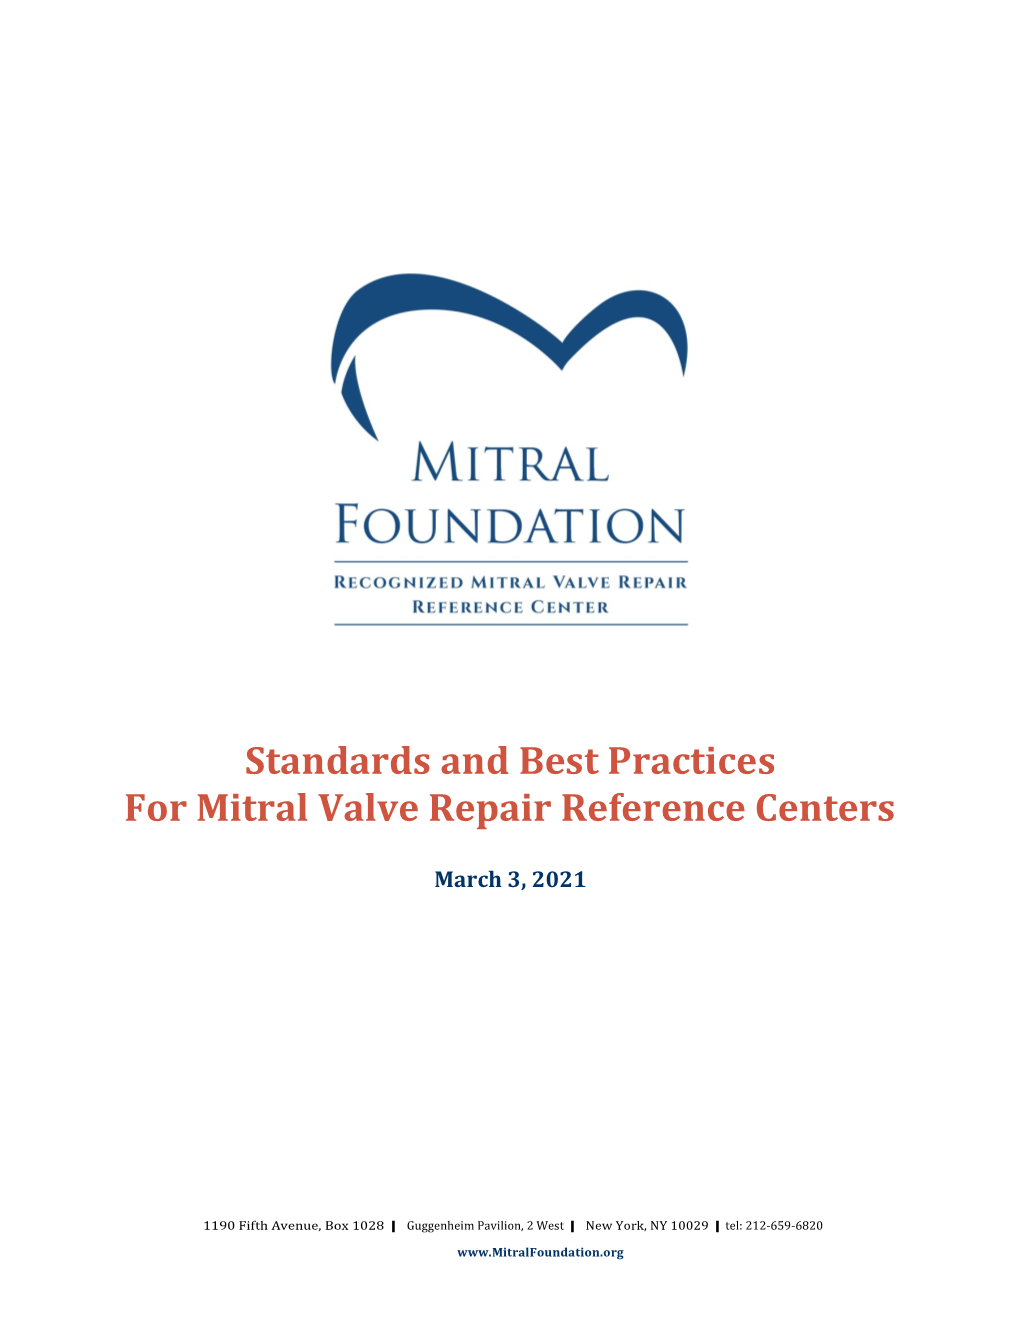 Standards and Best Practices for Mitral Valve Repair Reference Centers